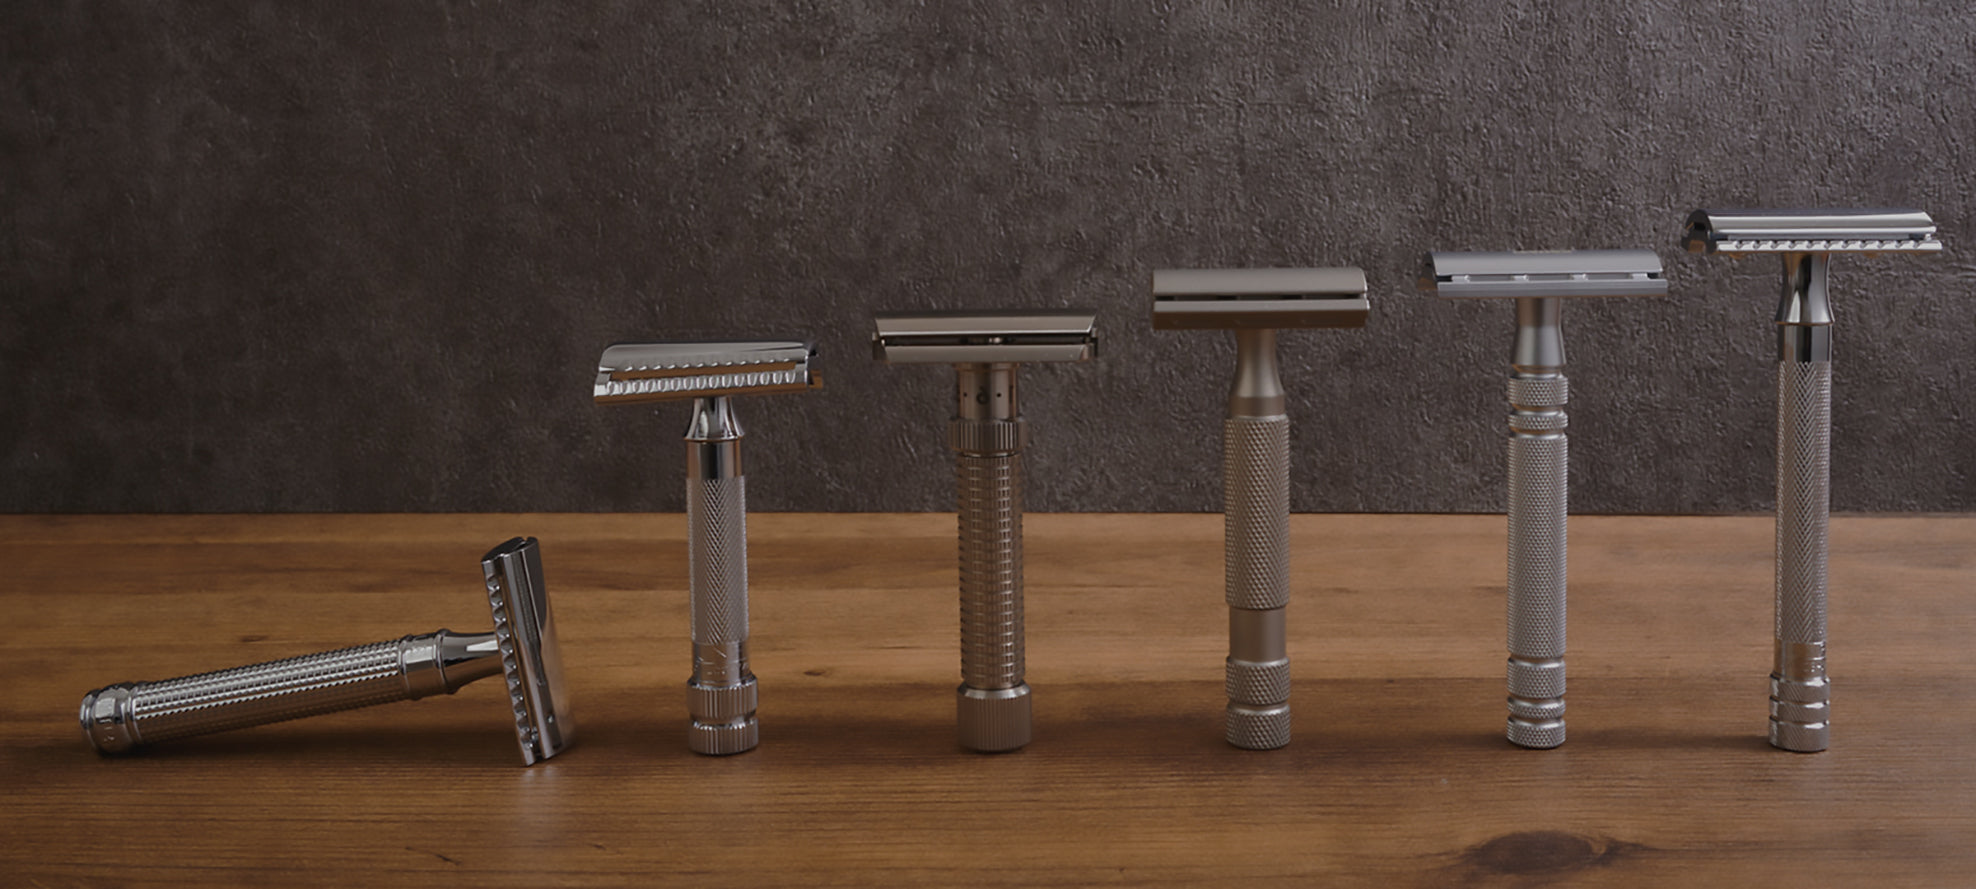 The History Of Safety Razors - Grown Man Shave